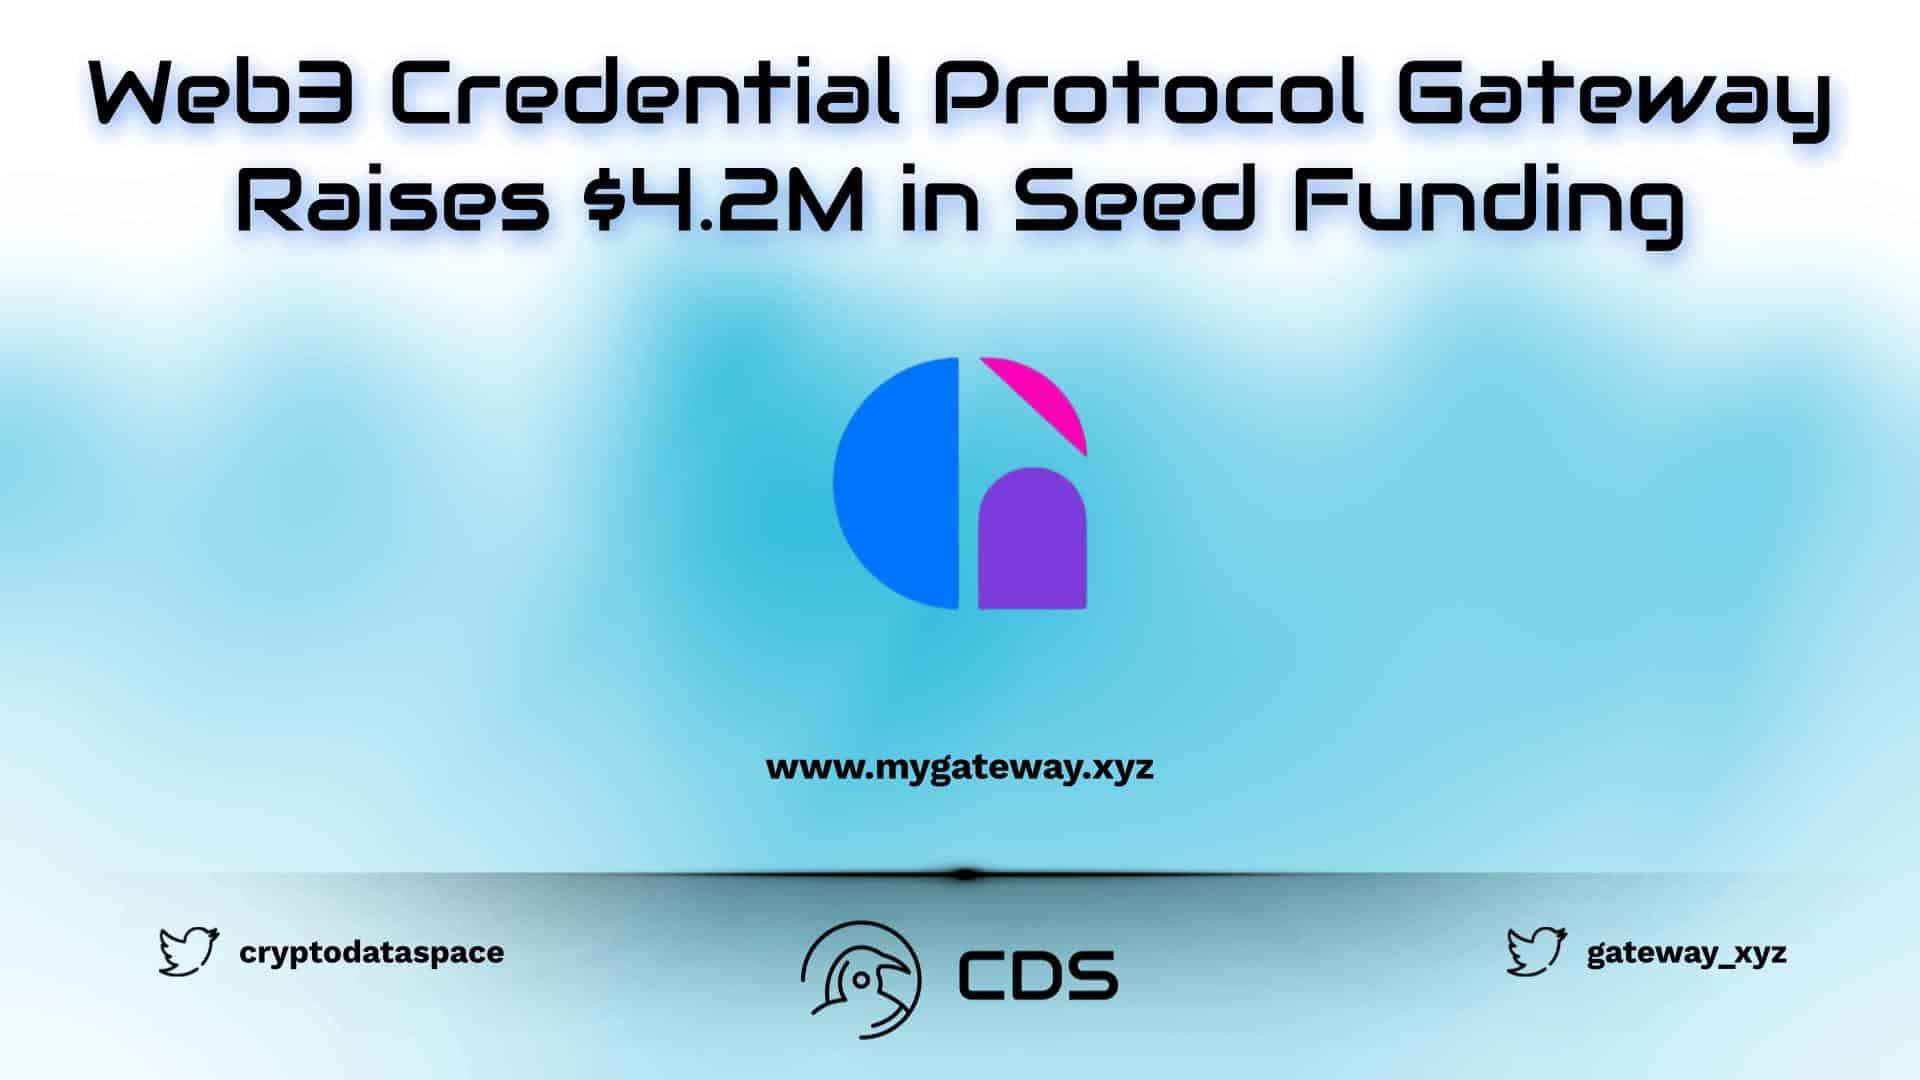 Web3 Credential Protocol Gateway Raises $4.2M in Seed Funding